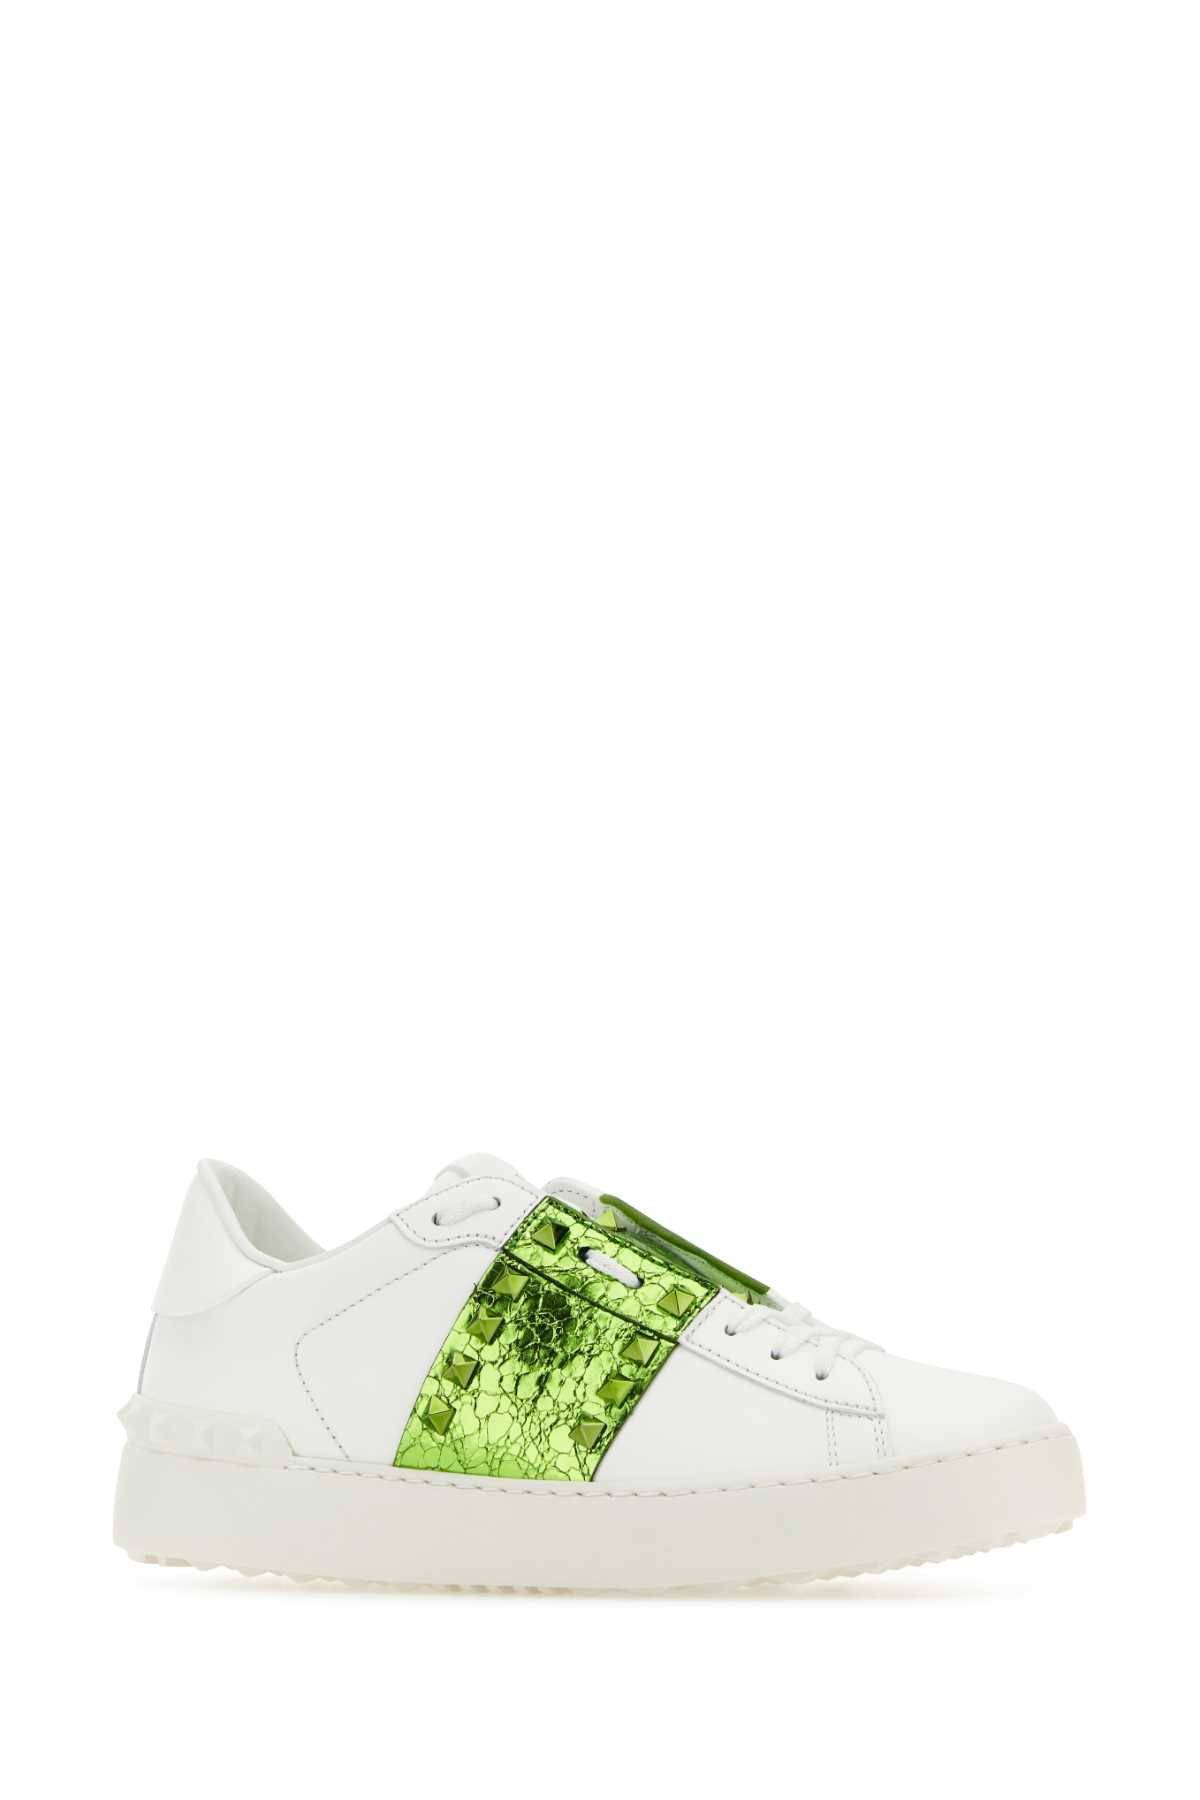 Shop Valentino White Leather Rockstud Untitled Sneakers With Grass Green Band In Biachabia